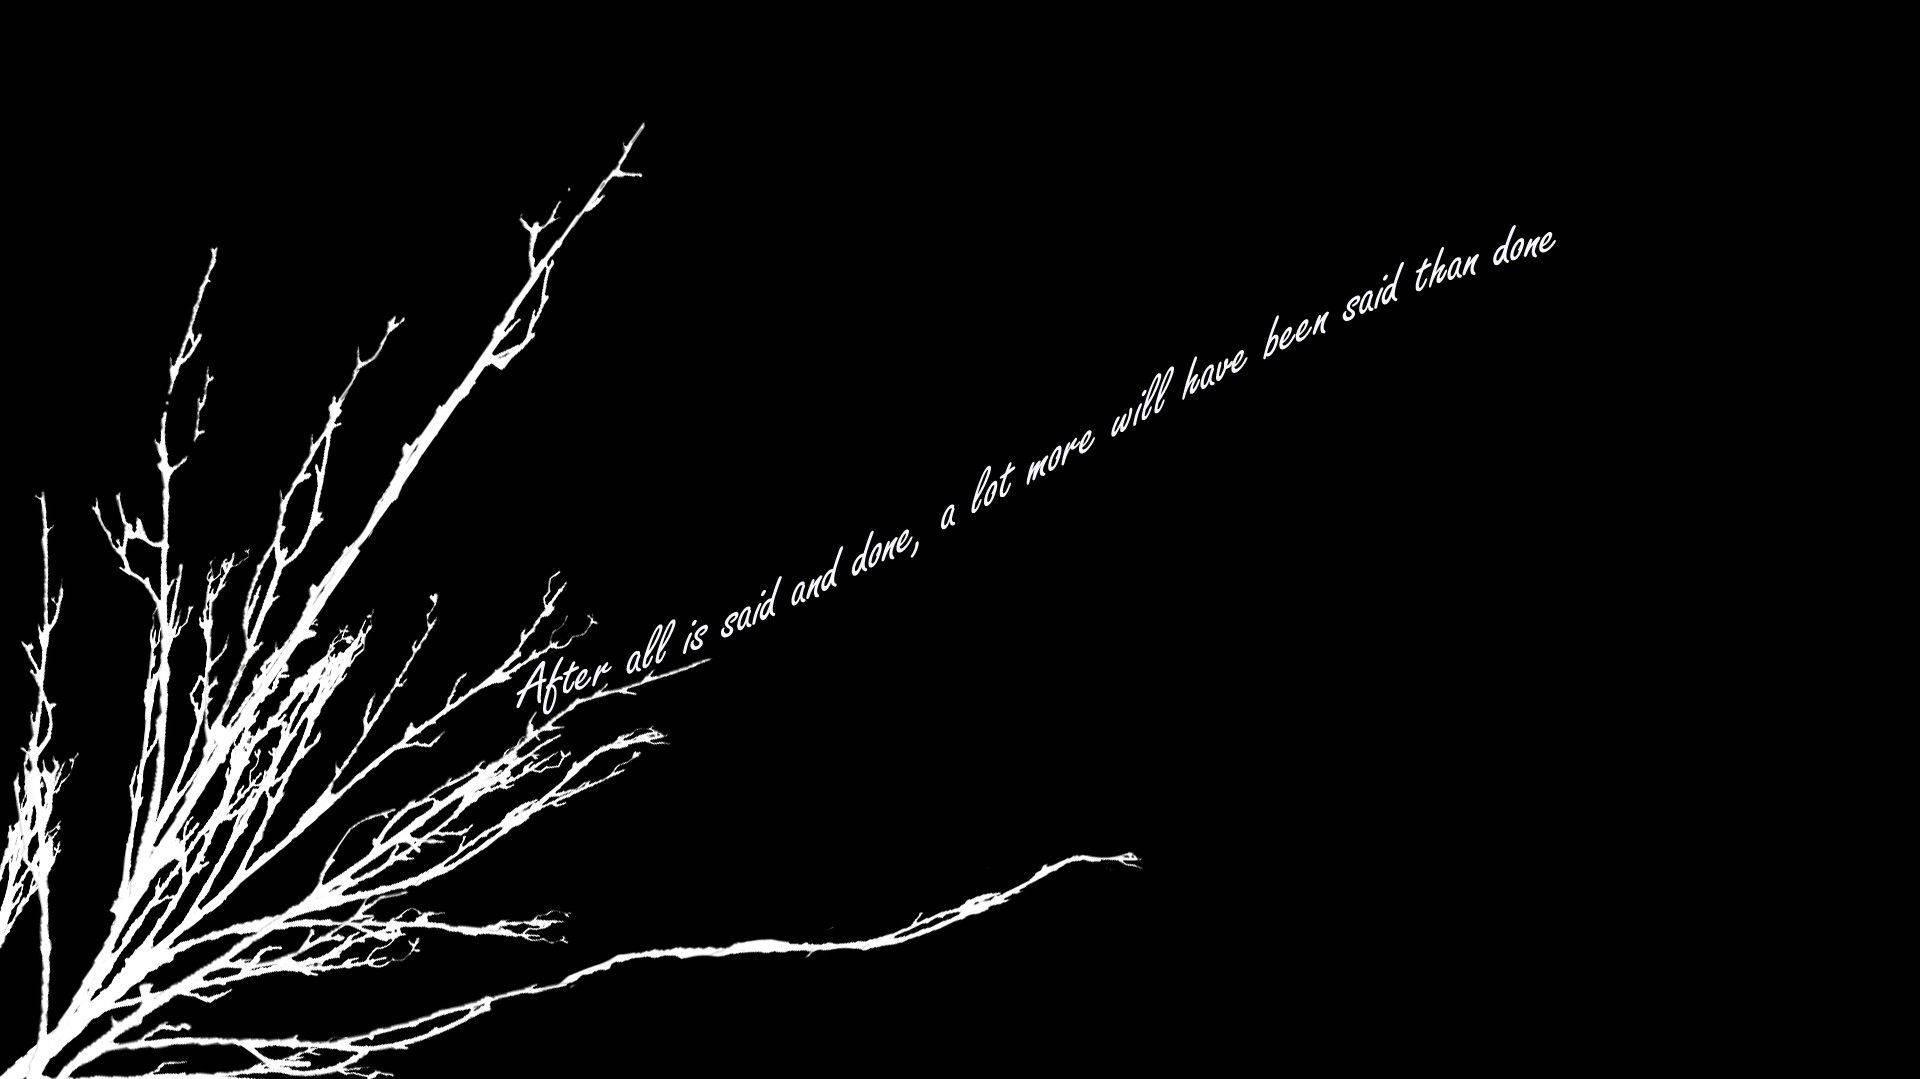 Black Deep Quotes Aesthetic And Laptop Wallpaper